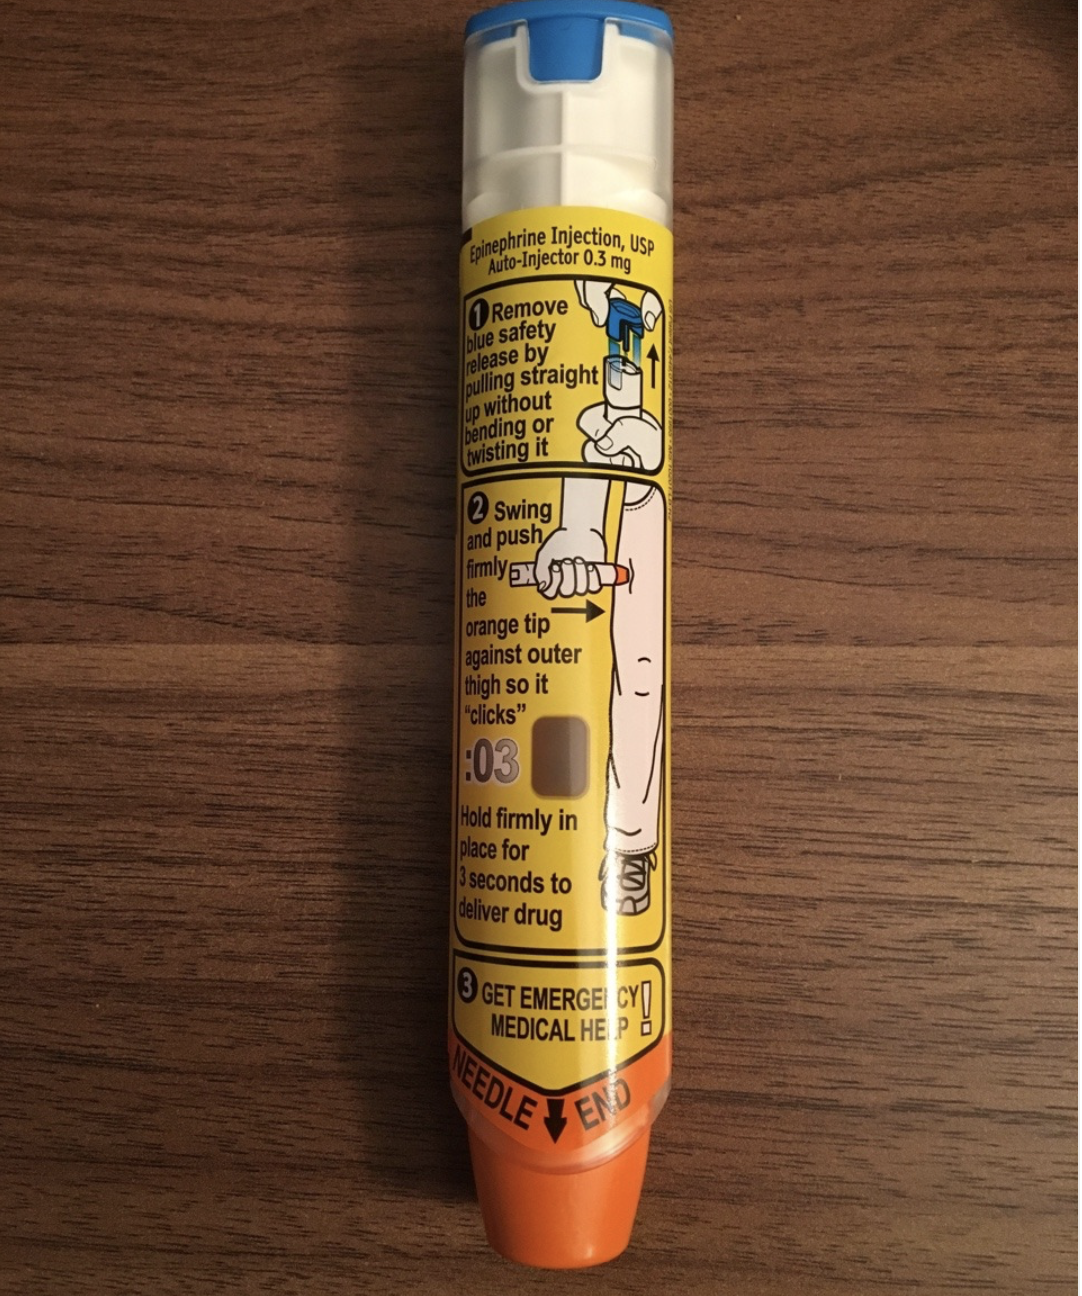 Tumblr user demonstrates how to use an epipen